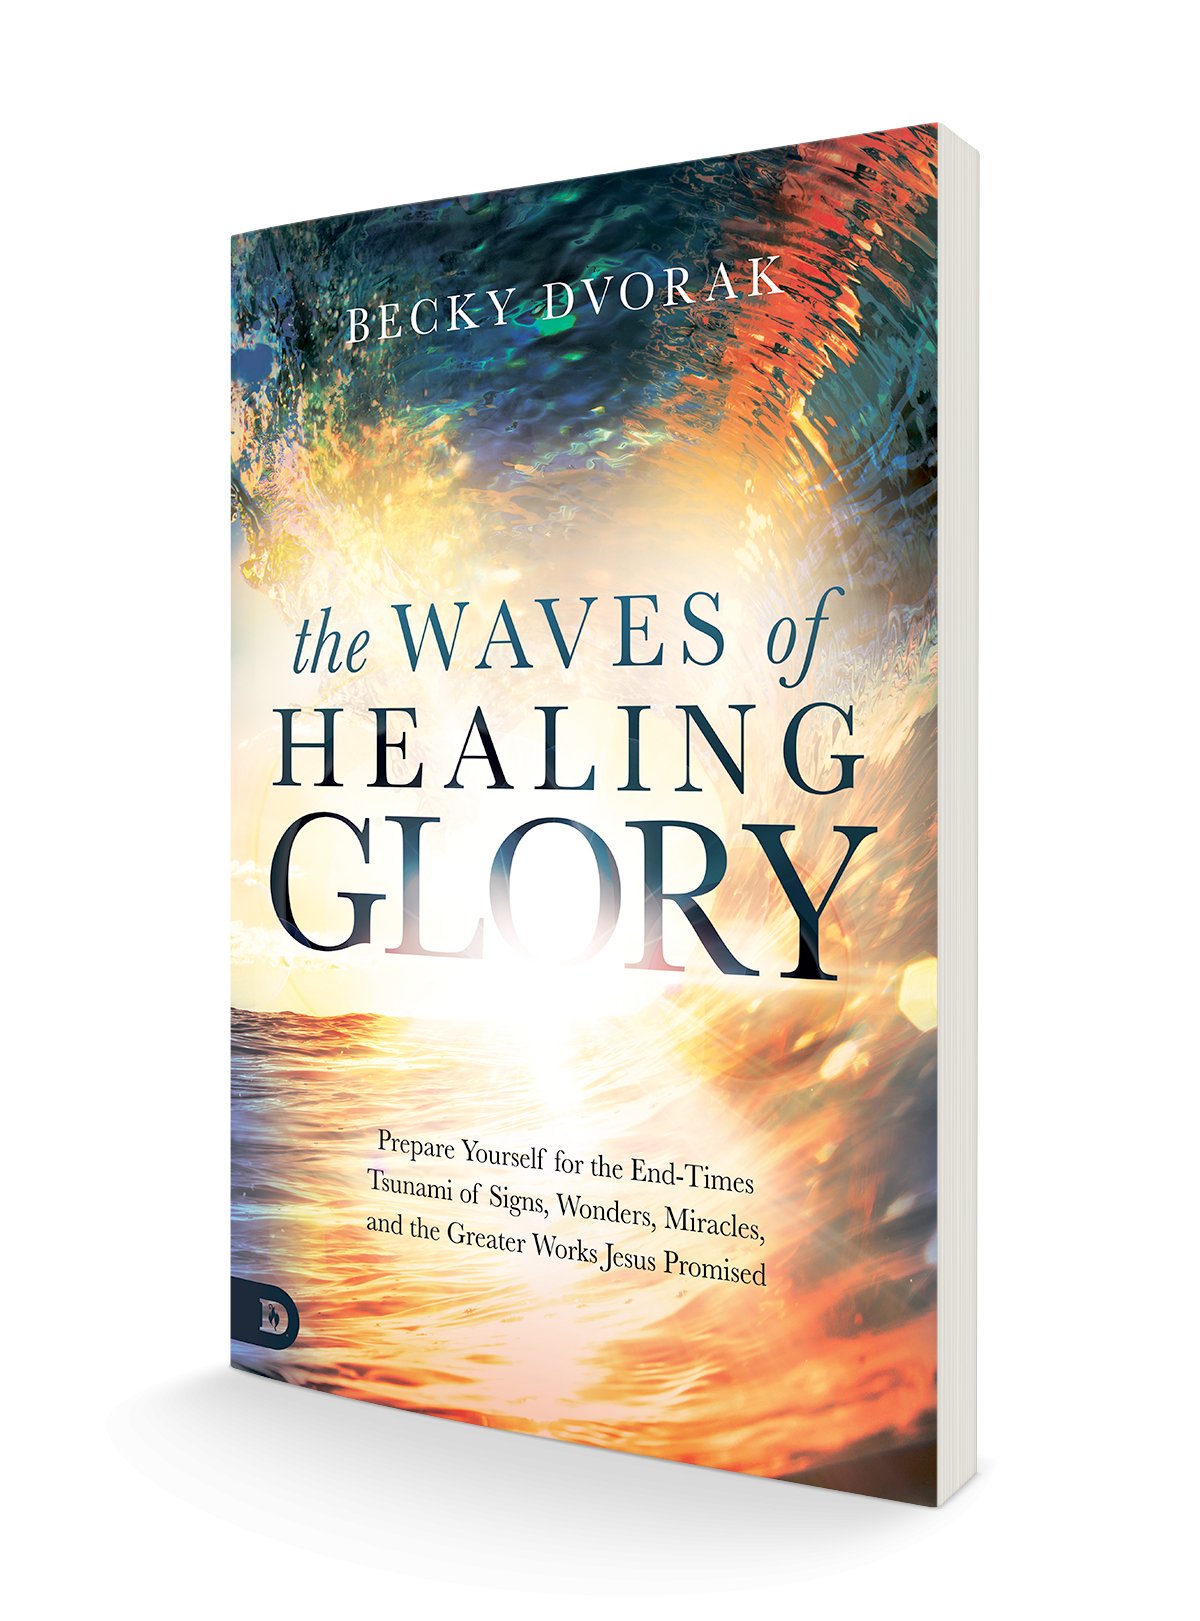 The Waves of Healing Glory: Prepare Yourself for the End-Times Tsunami of Signs, Wonders, Miracles, and the Greater Works Jesus Promised Paperback – November 16, 2021